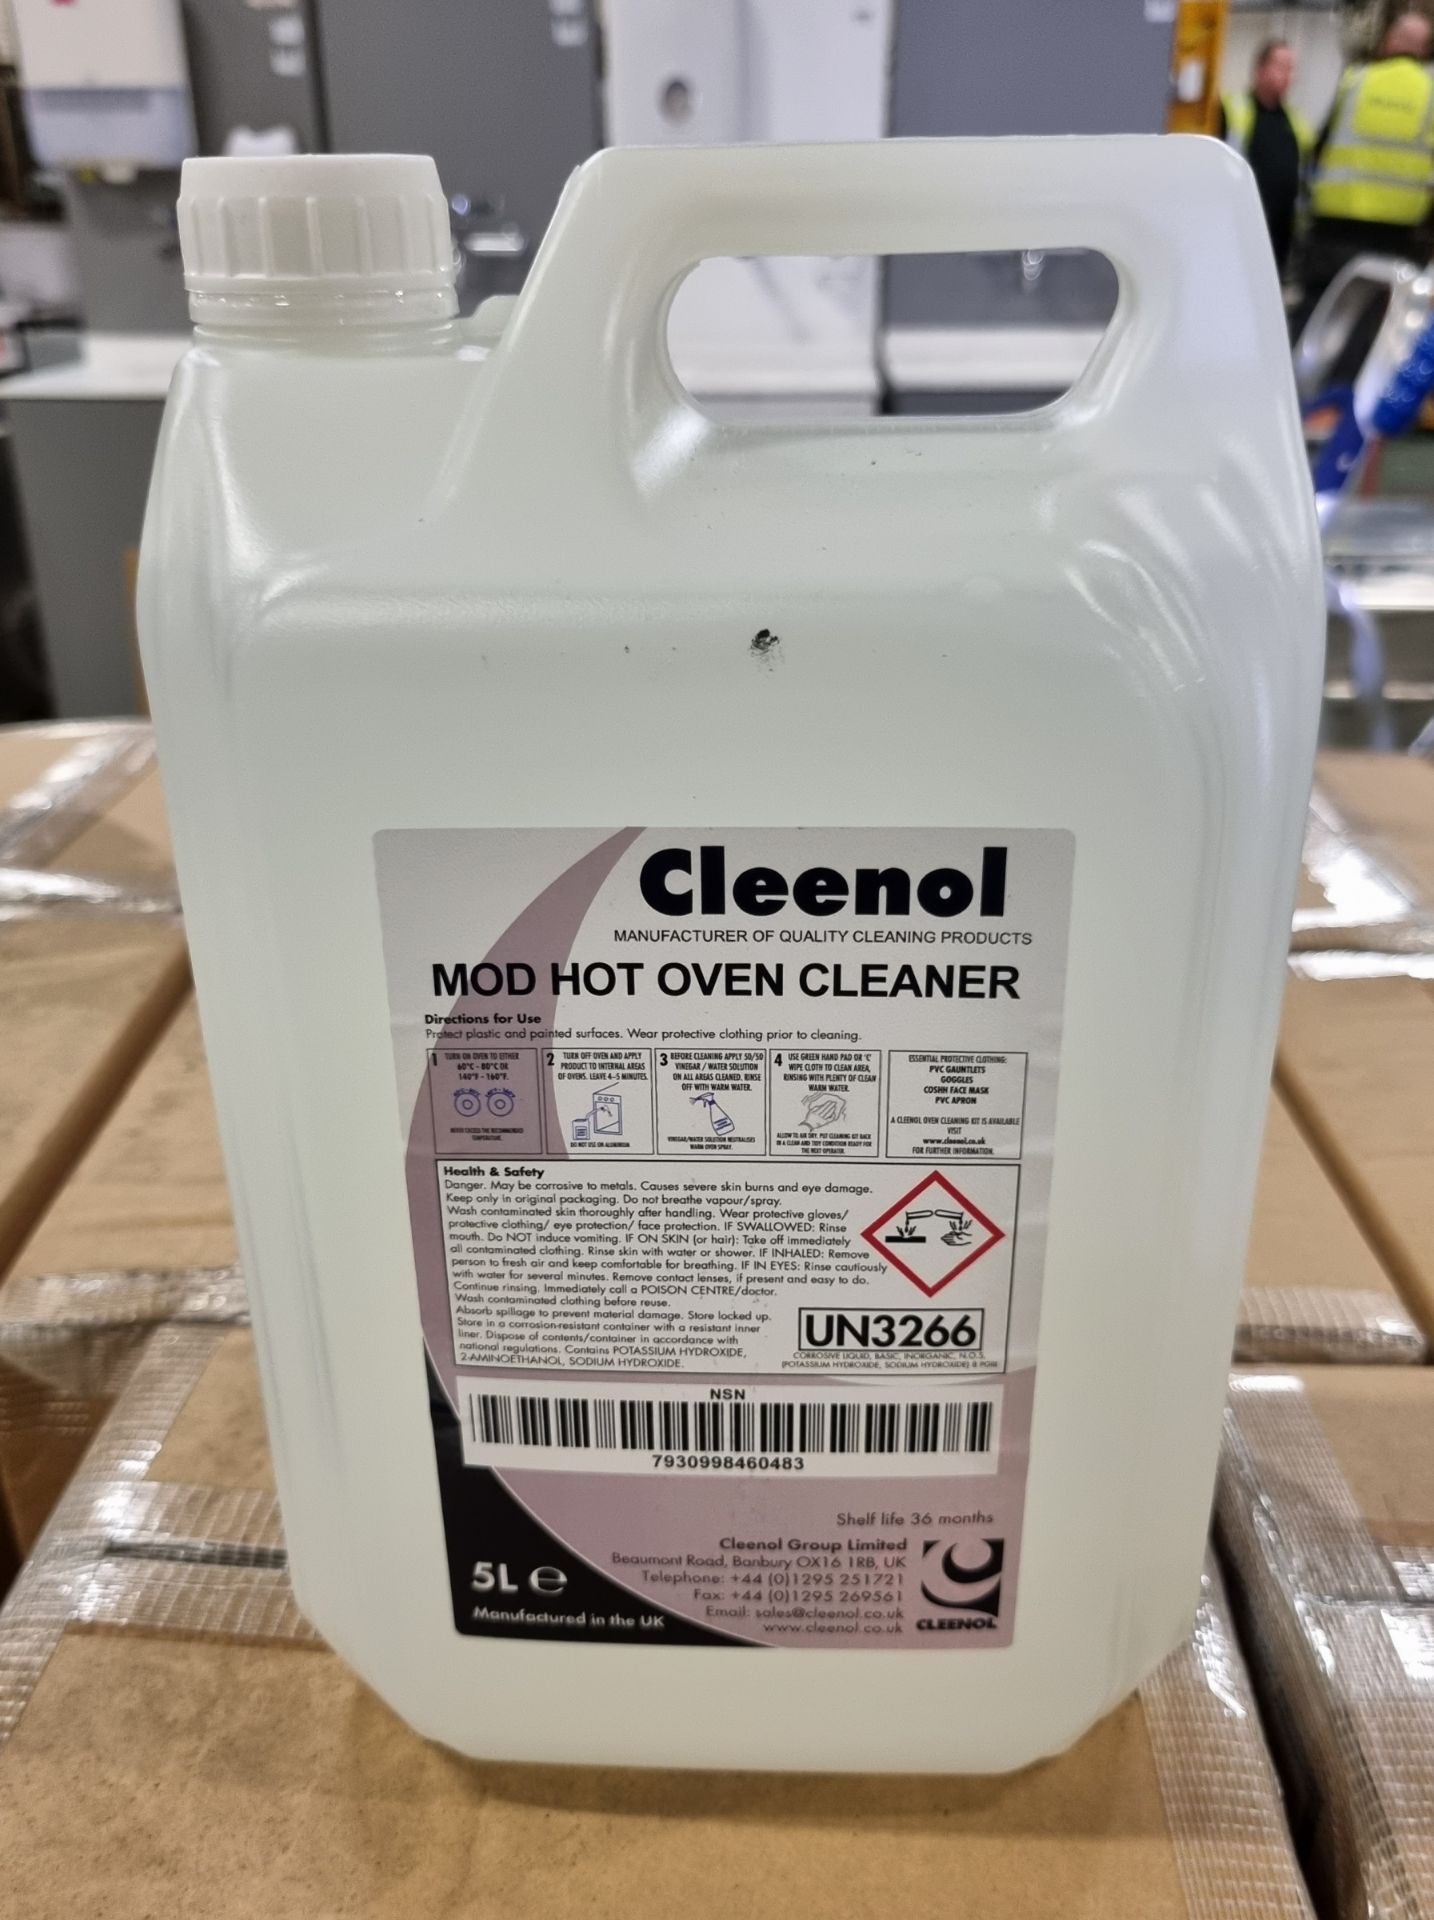 60x boxes of Cleenol Group hot oven cleaner - 5L bottle - 2 bottles per box - Image 3 of 4